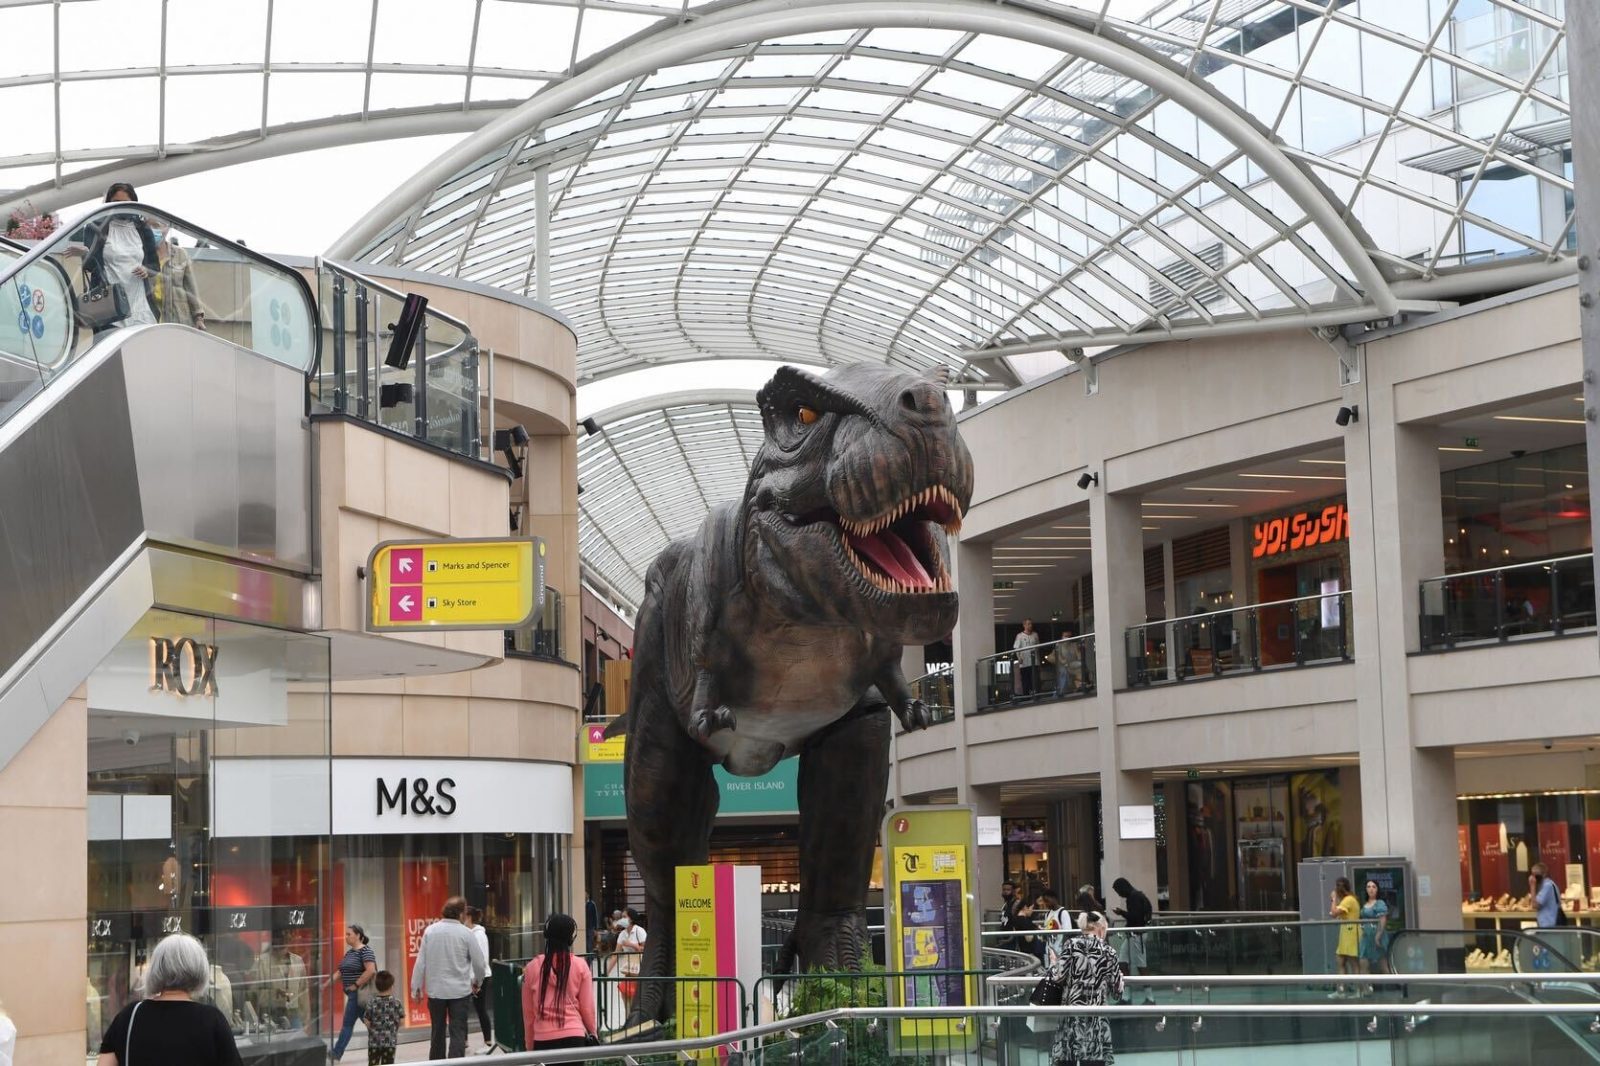 A life-size dinosaur figure from the Leeds Jurassic Trail. 